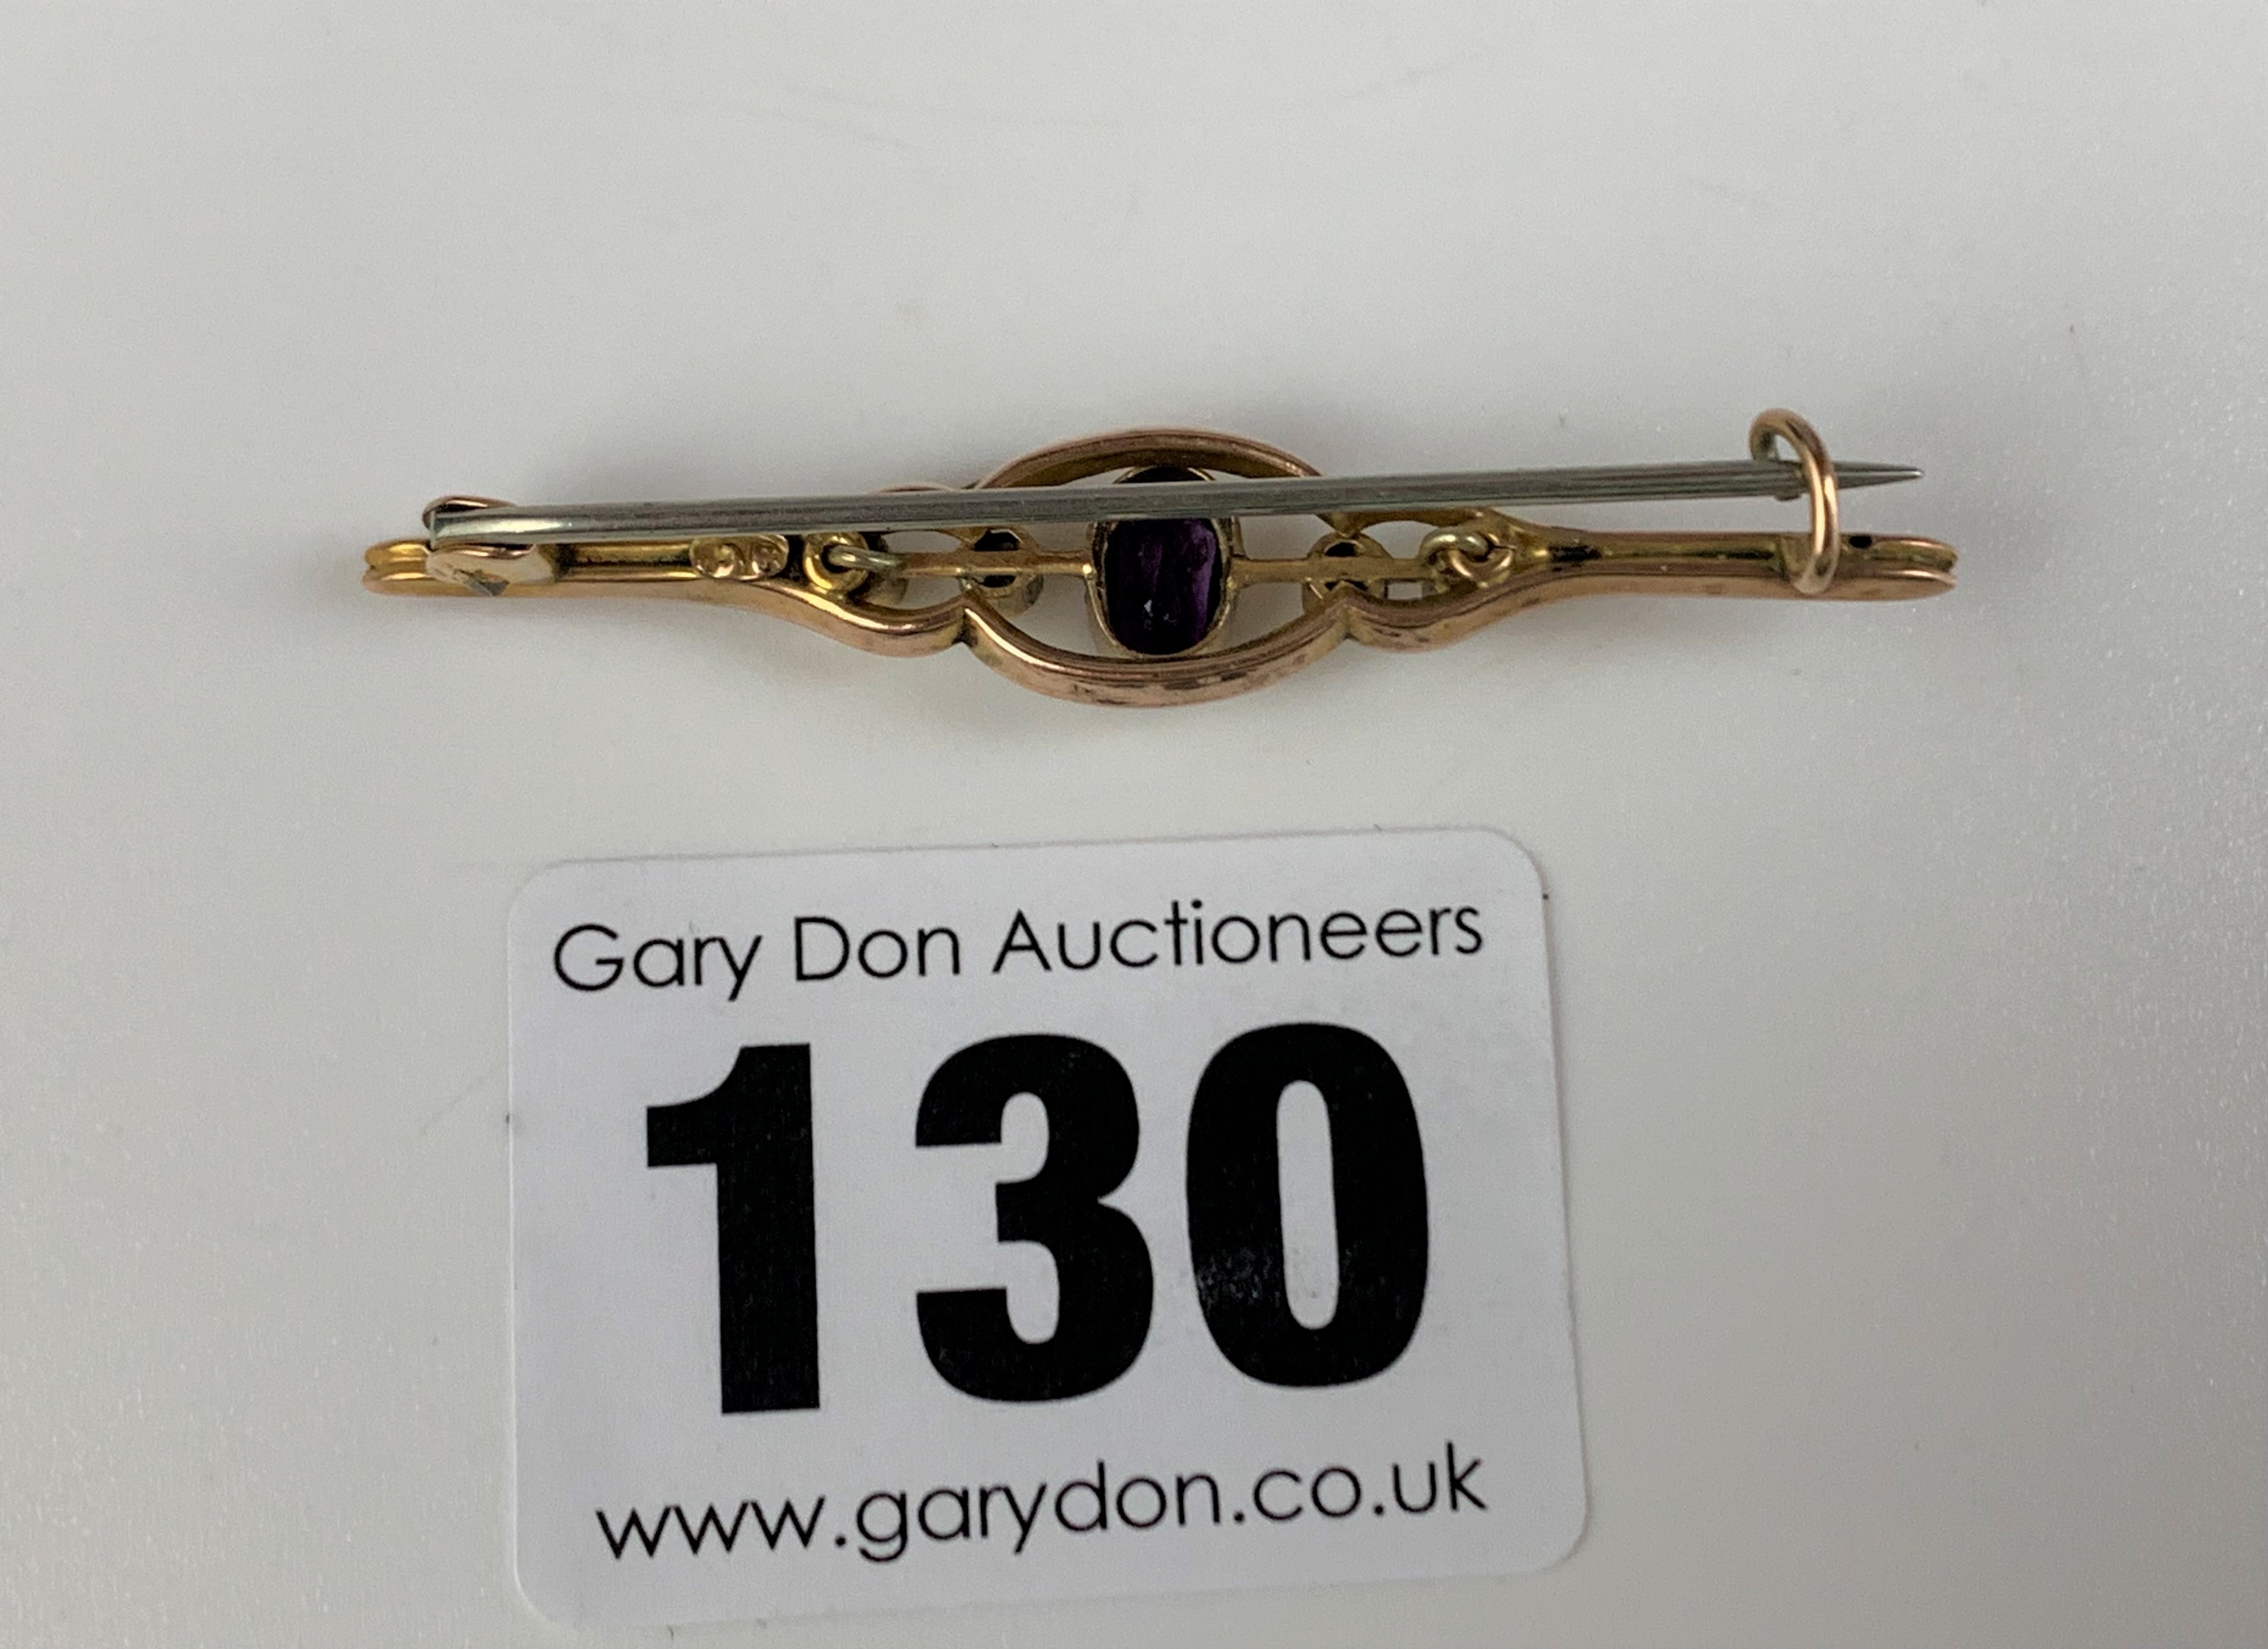 9k gold bar brooch with purple stone and seed pearls, length 2”, w: 1.7 gms - Image 3 of 3